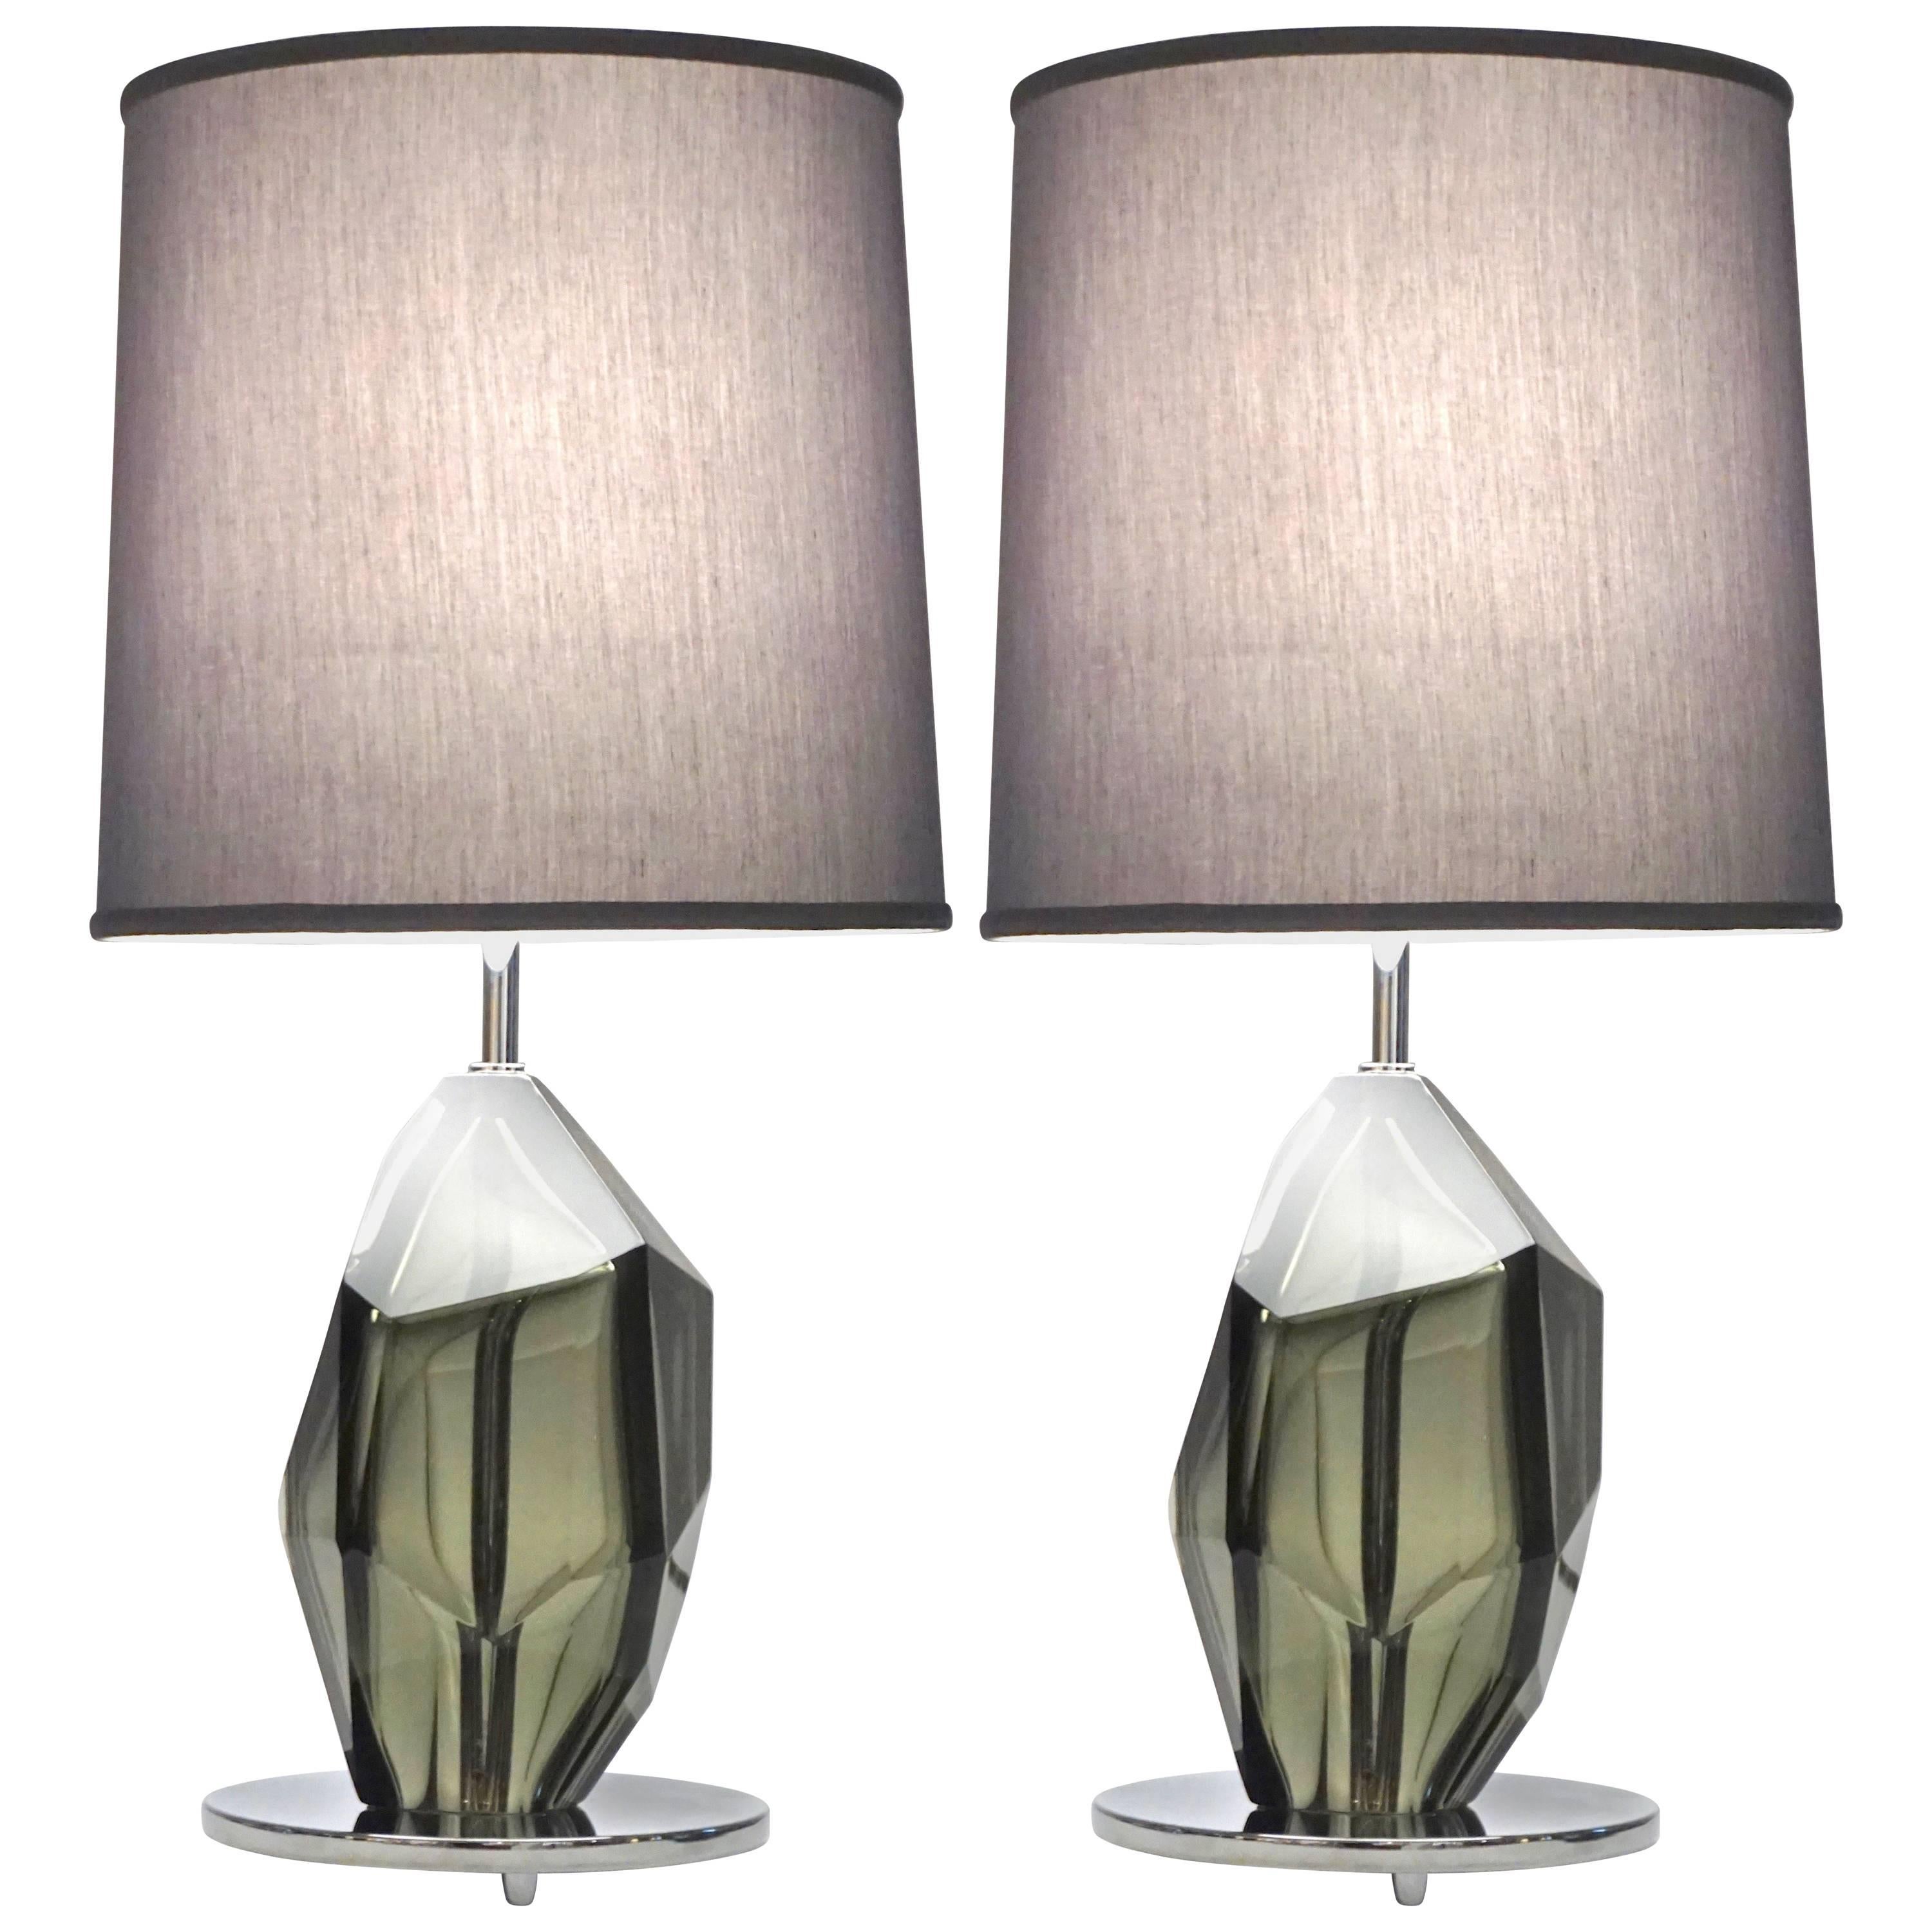 Donà Contemporary Italian Pair of Faceted Solid Rock Smoked Murano Glass Lamps